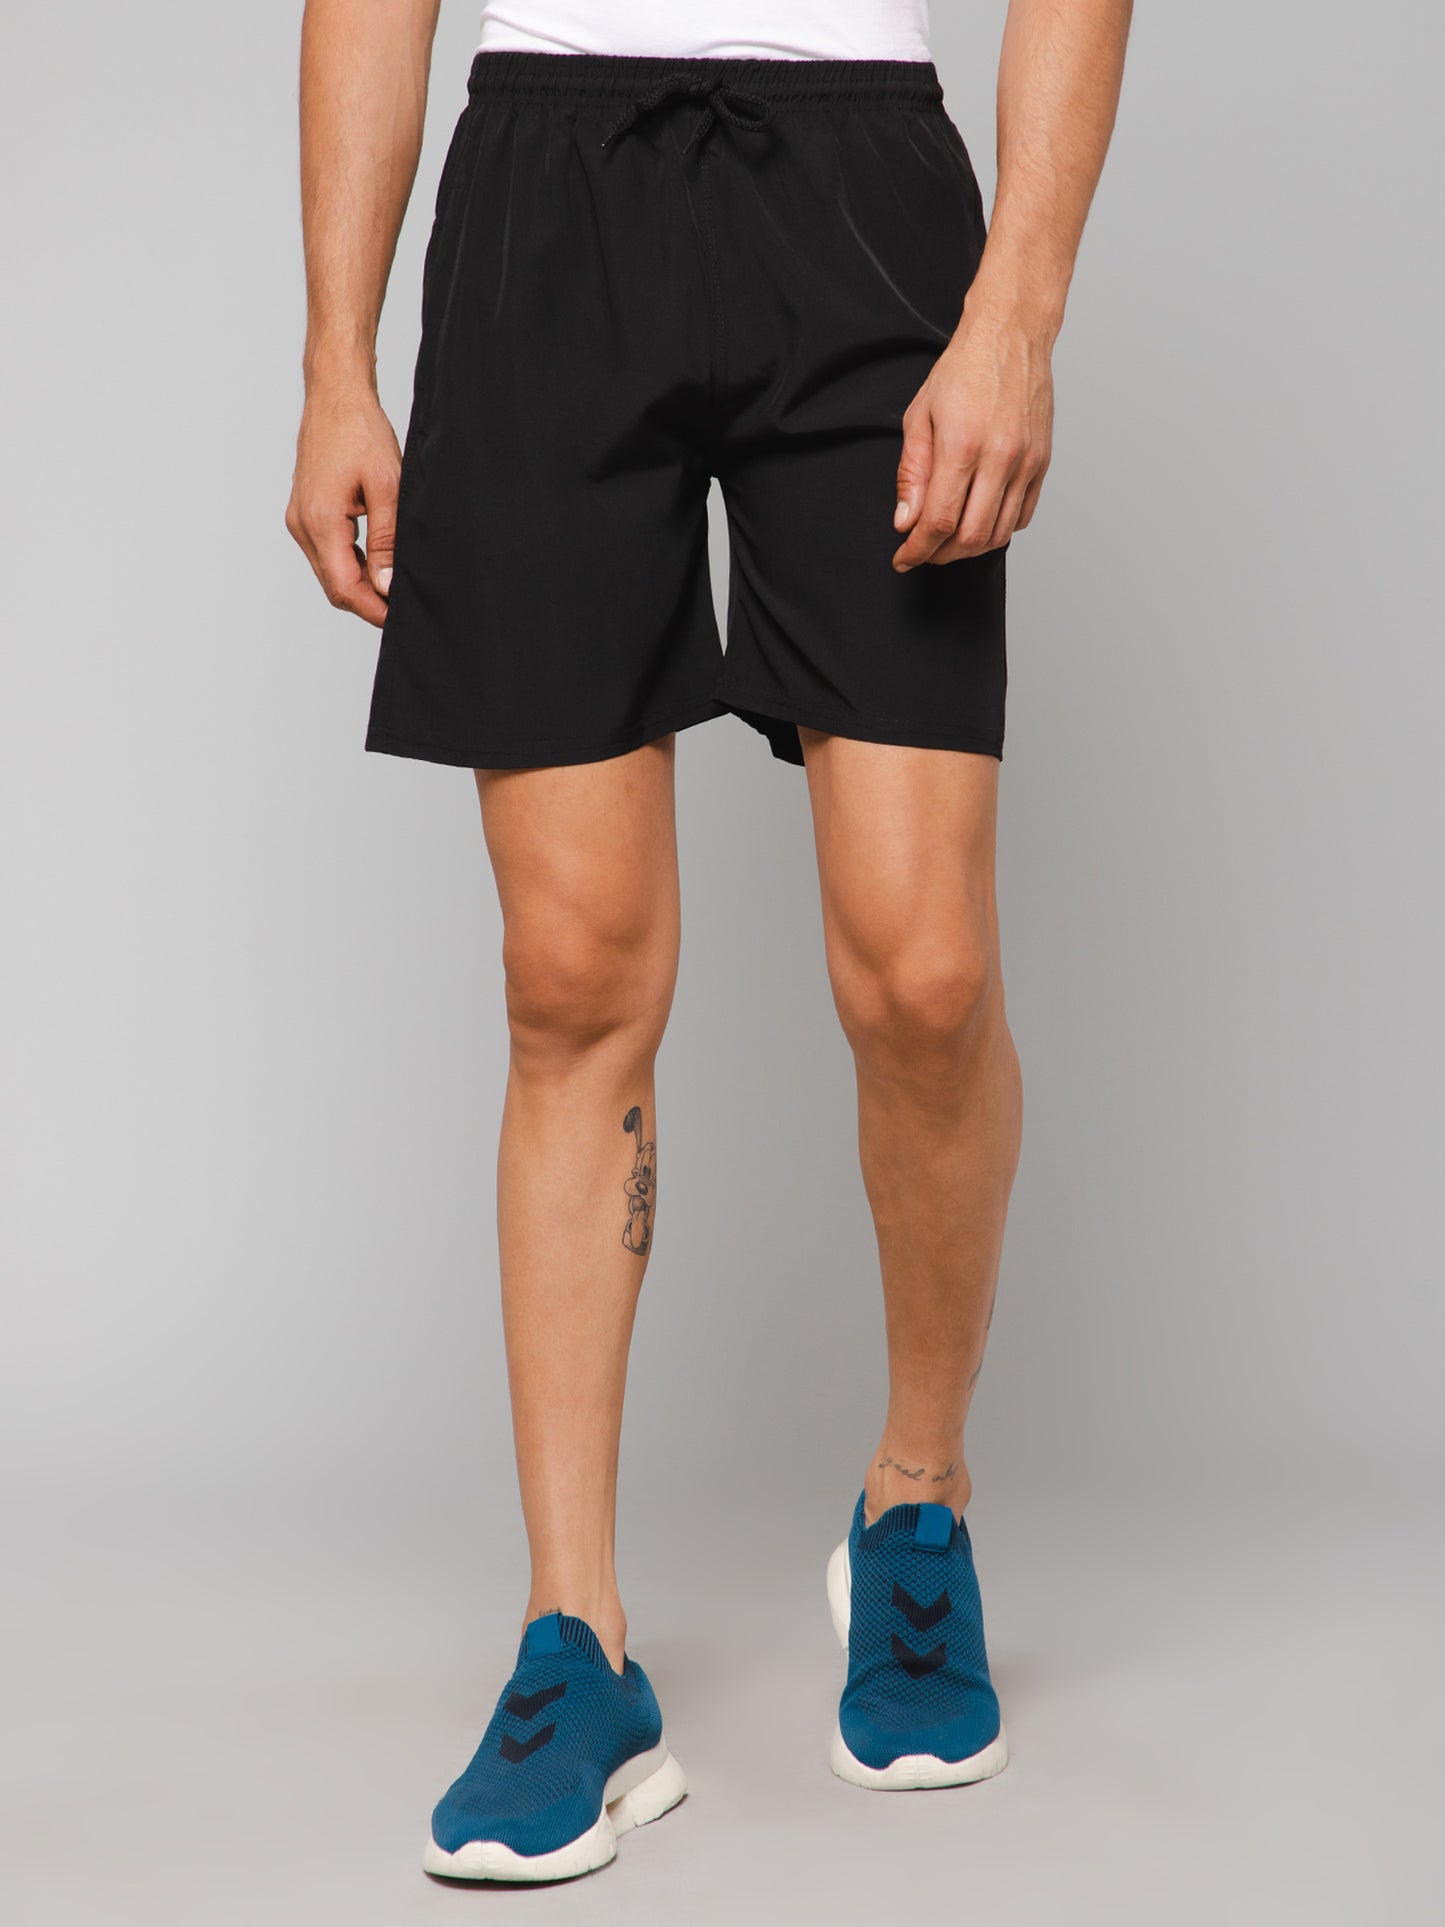 Solid Black Shorts with Zip Pockets